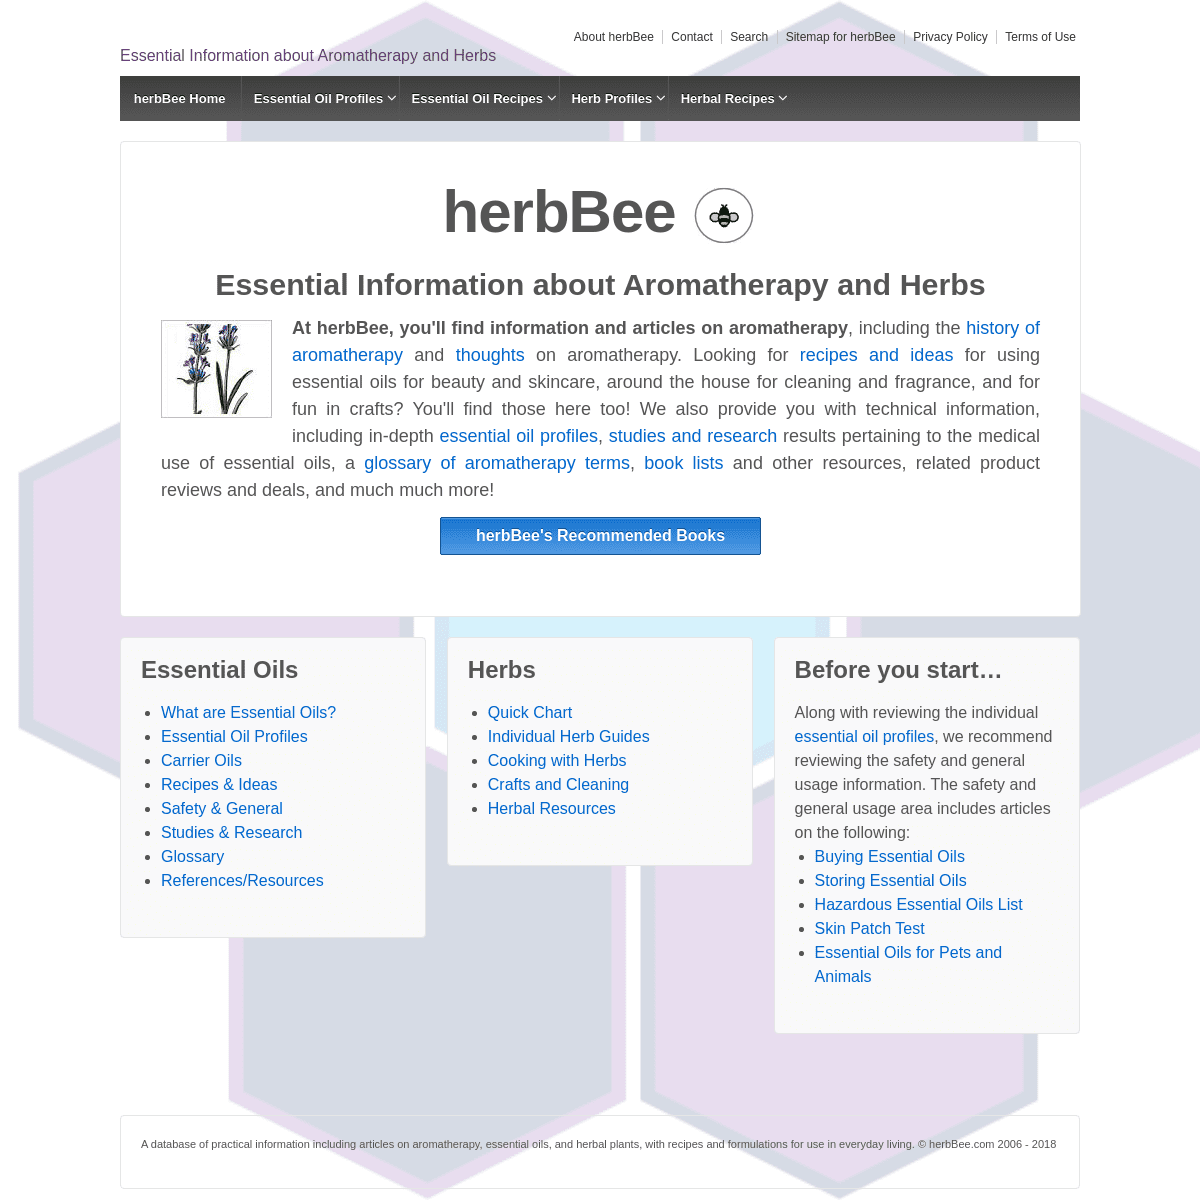 A complete backup of herbbee.com